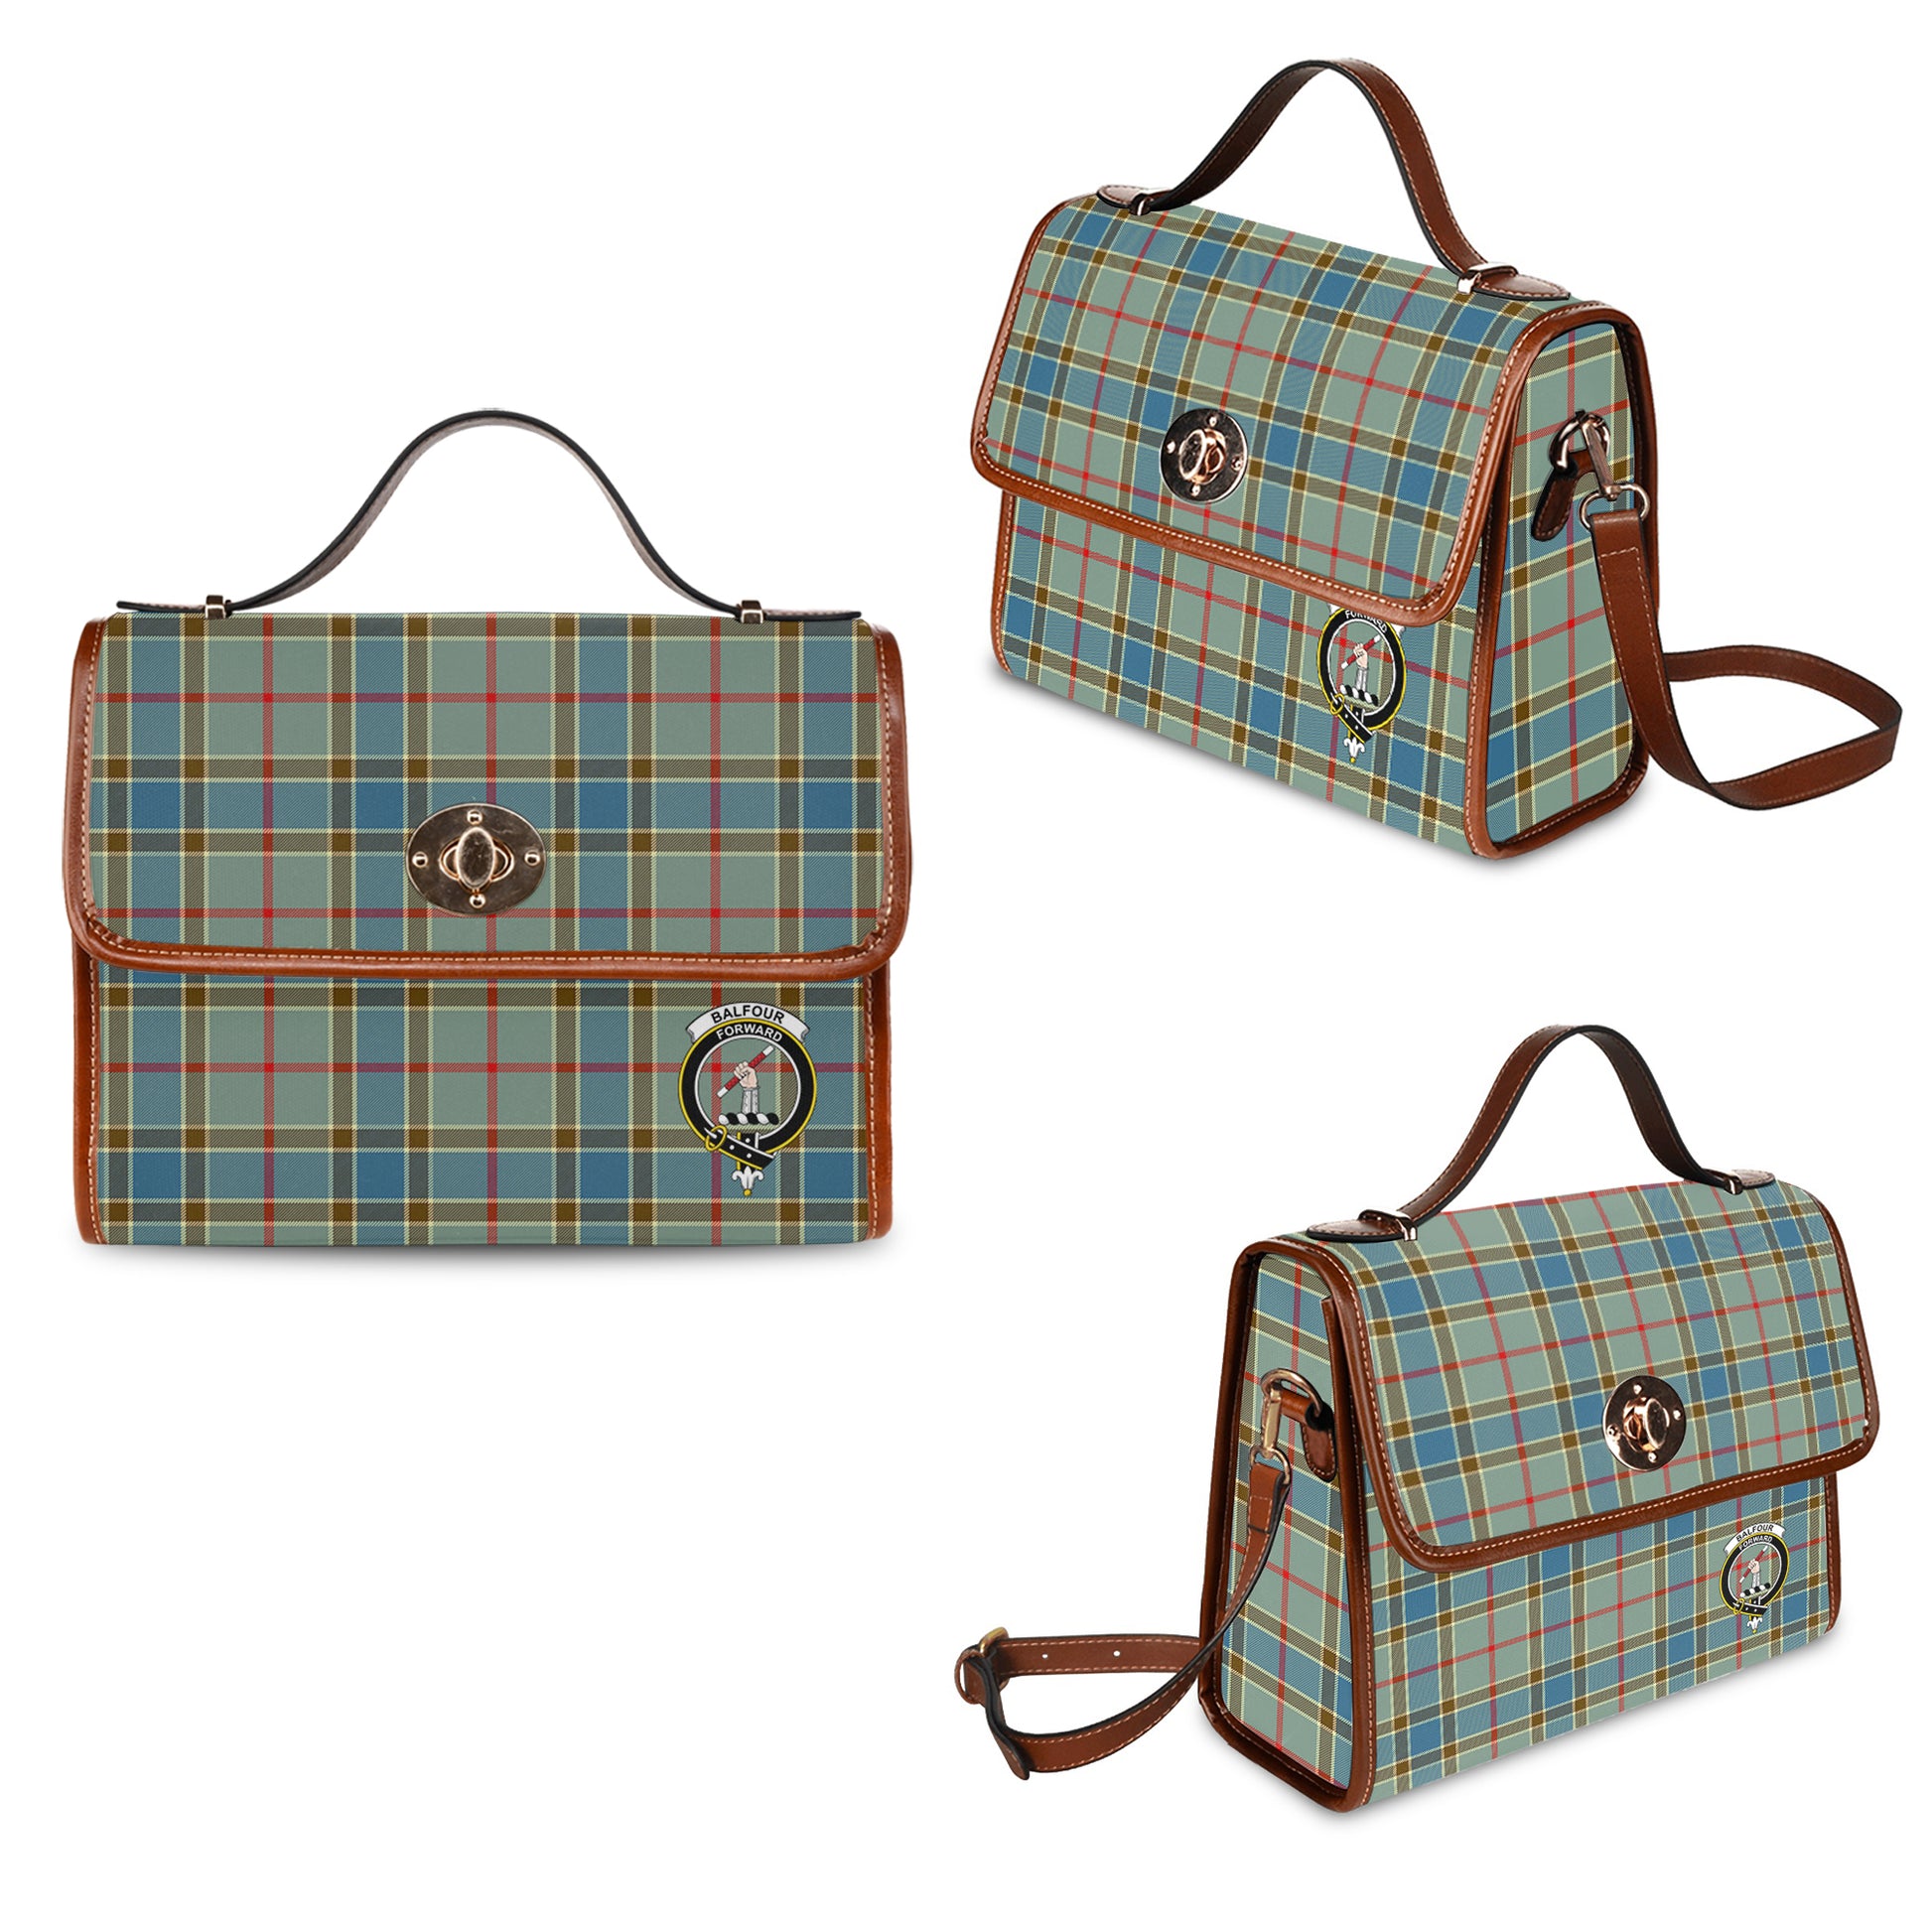 Balfour Blue Tartan Leather Strap Waterproof Canvas Bag with Family Crest One Size 34cm * 42cm (13.4" x 16.5") - Tartanvibesclothing